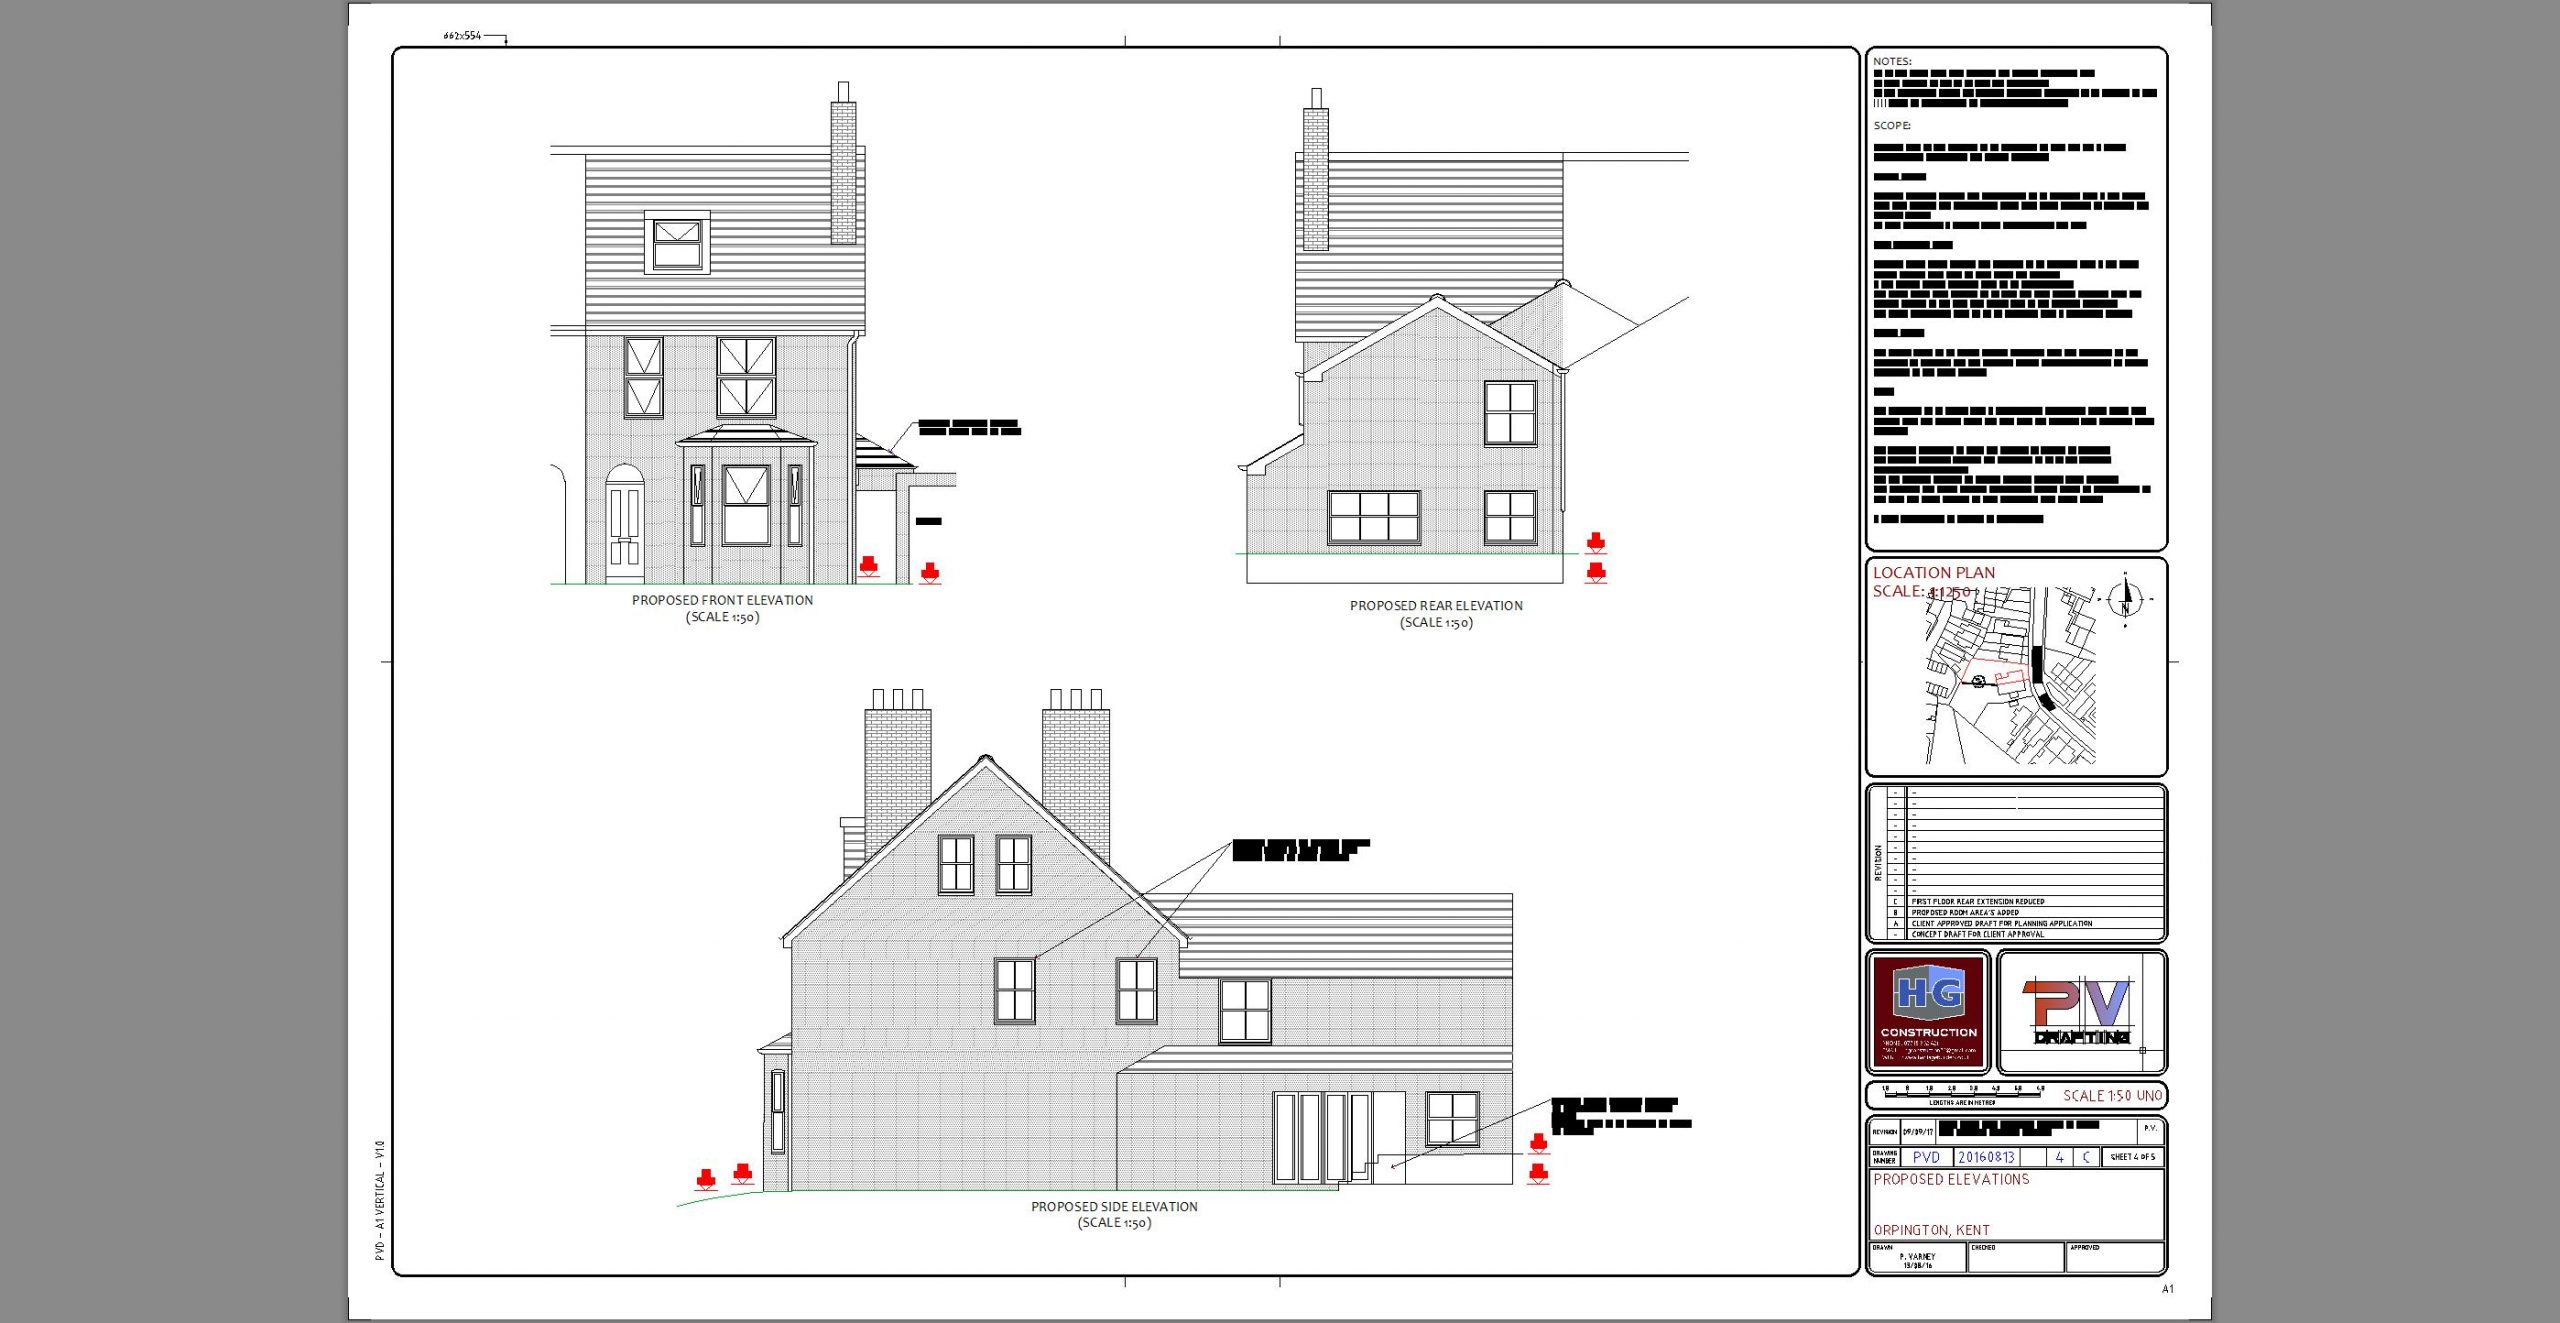 Planning Drawing - Orpington Kent - Proposed Elevations